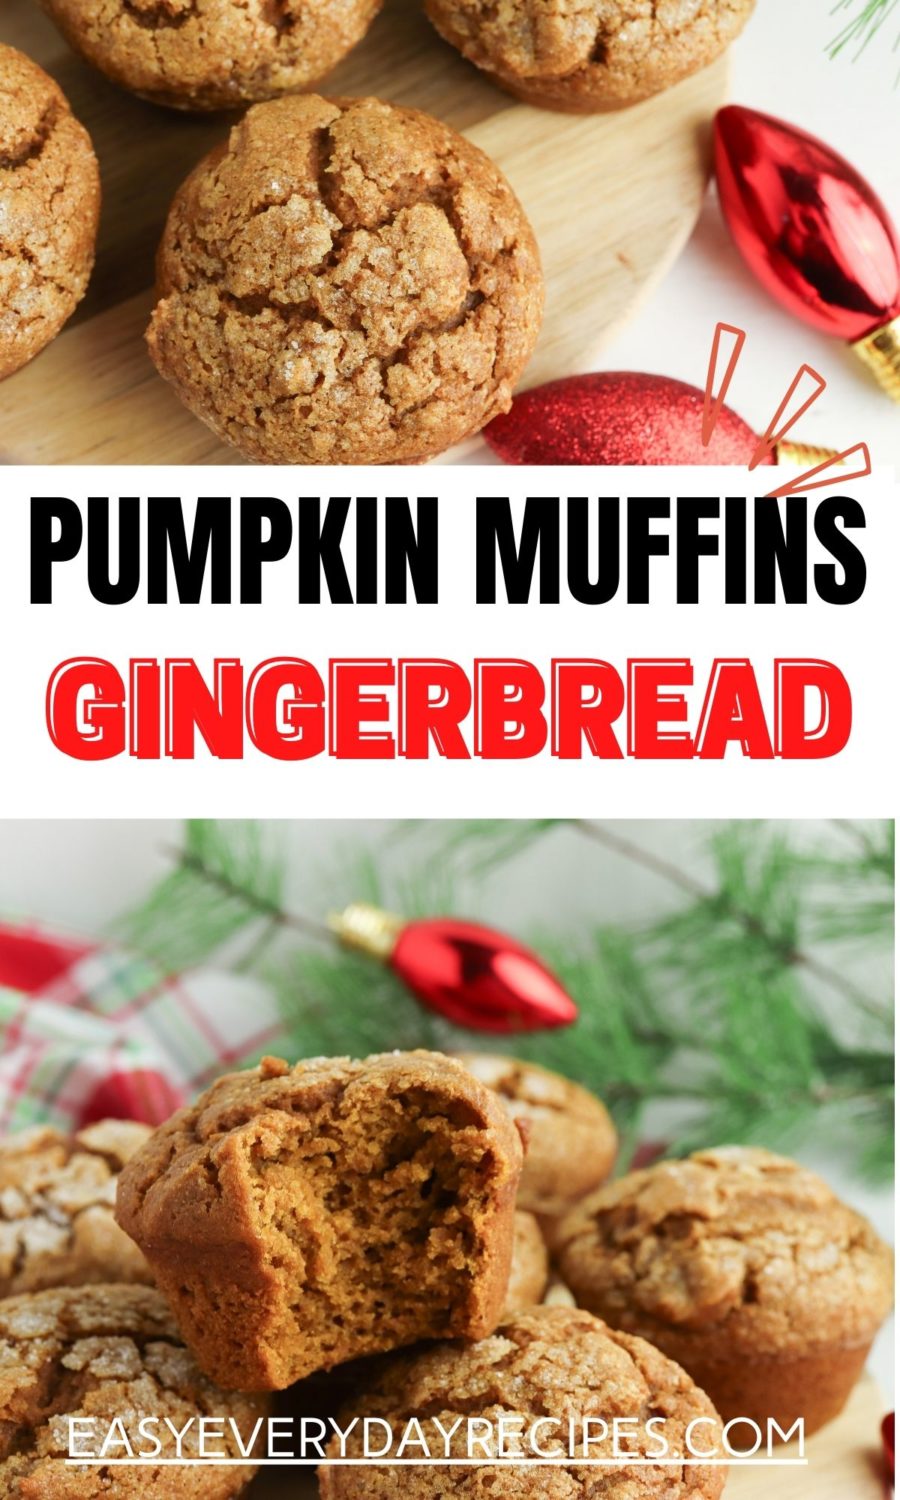 Pumpkin muffins gingerbread with the text pumpkin muffins gingerbread.